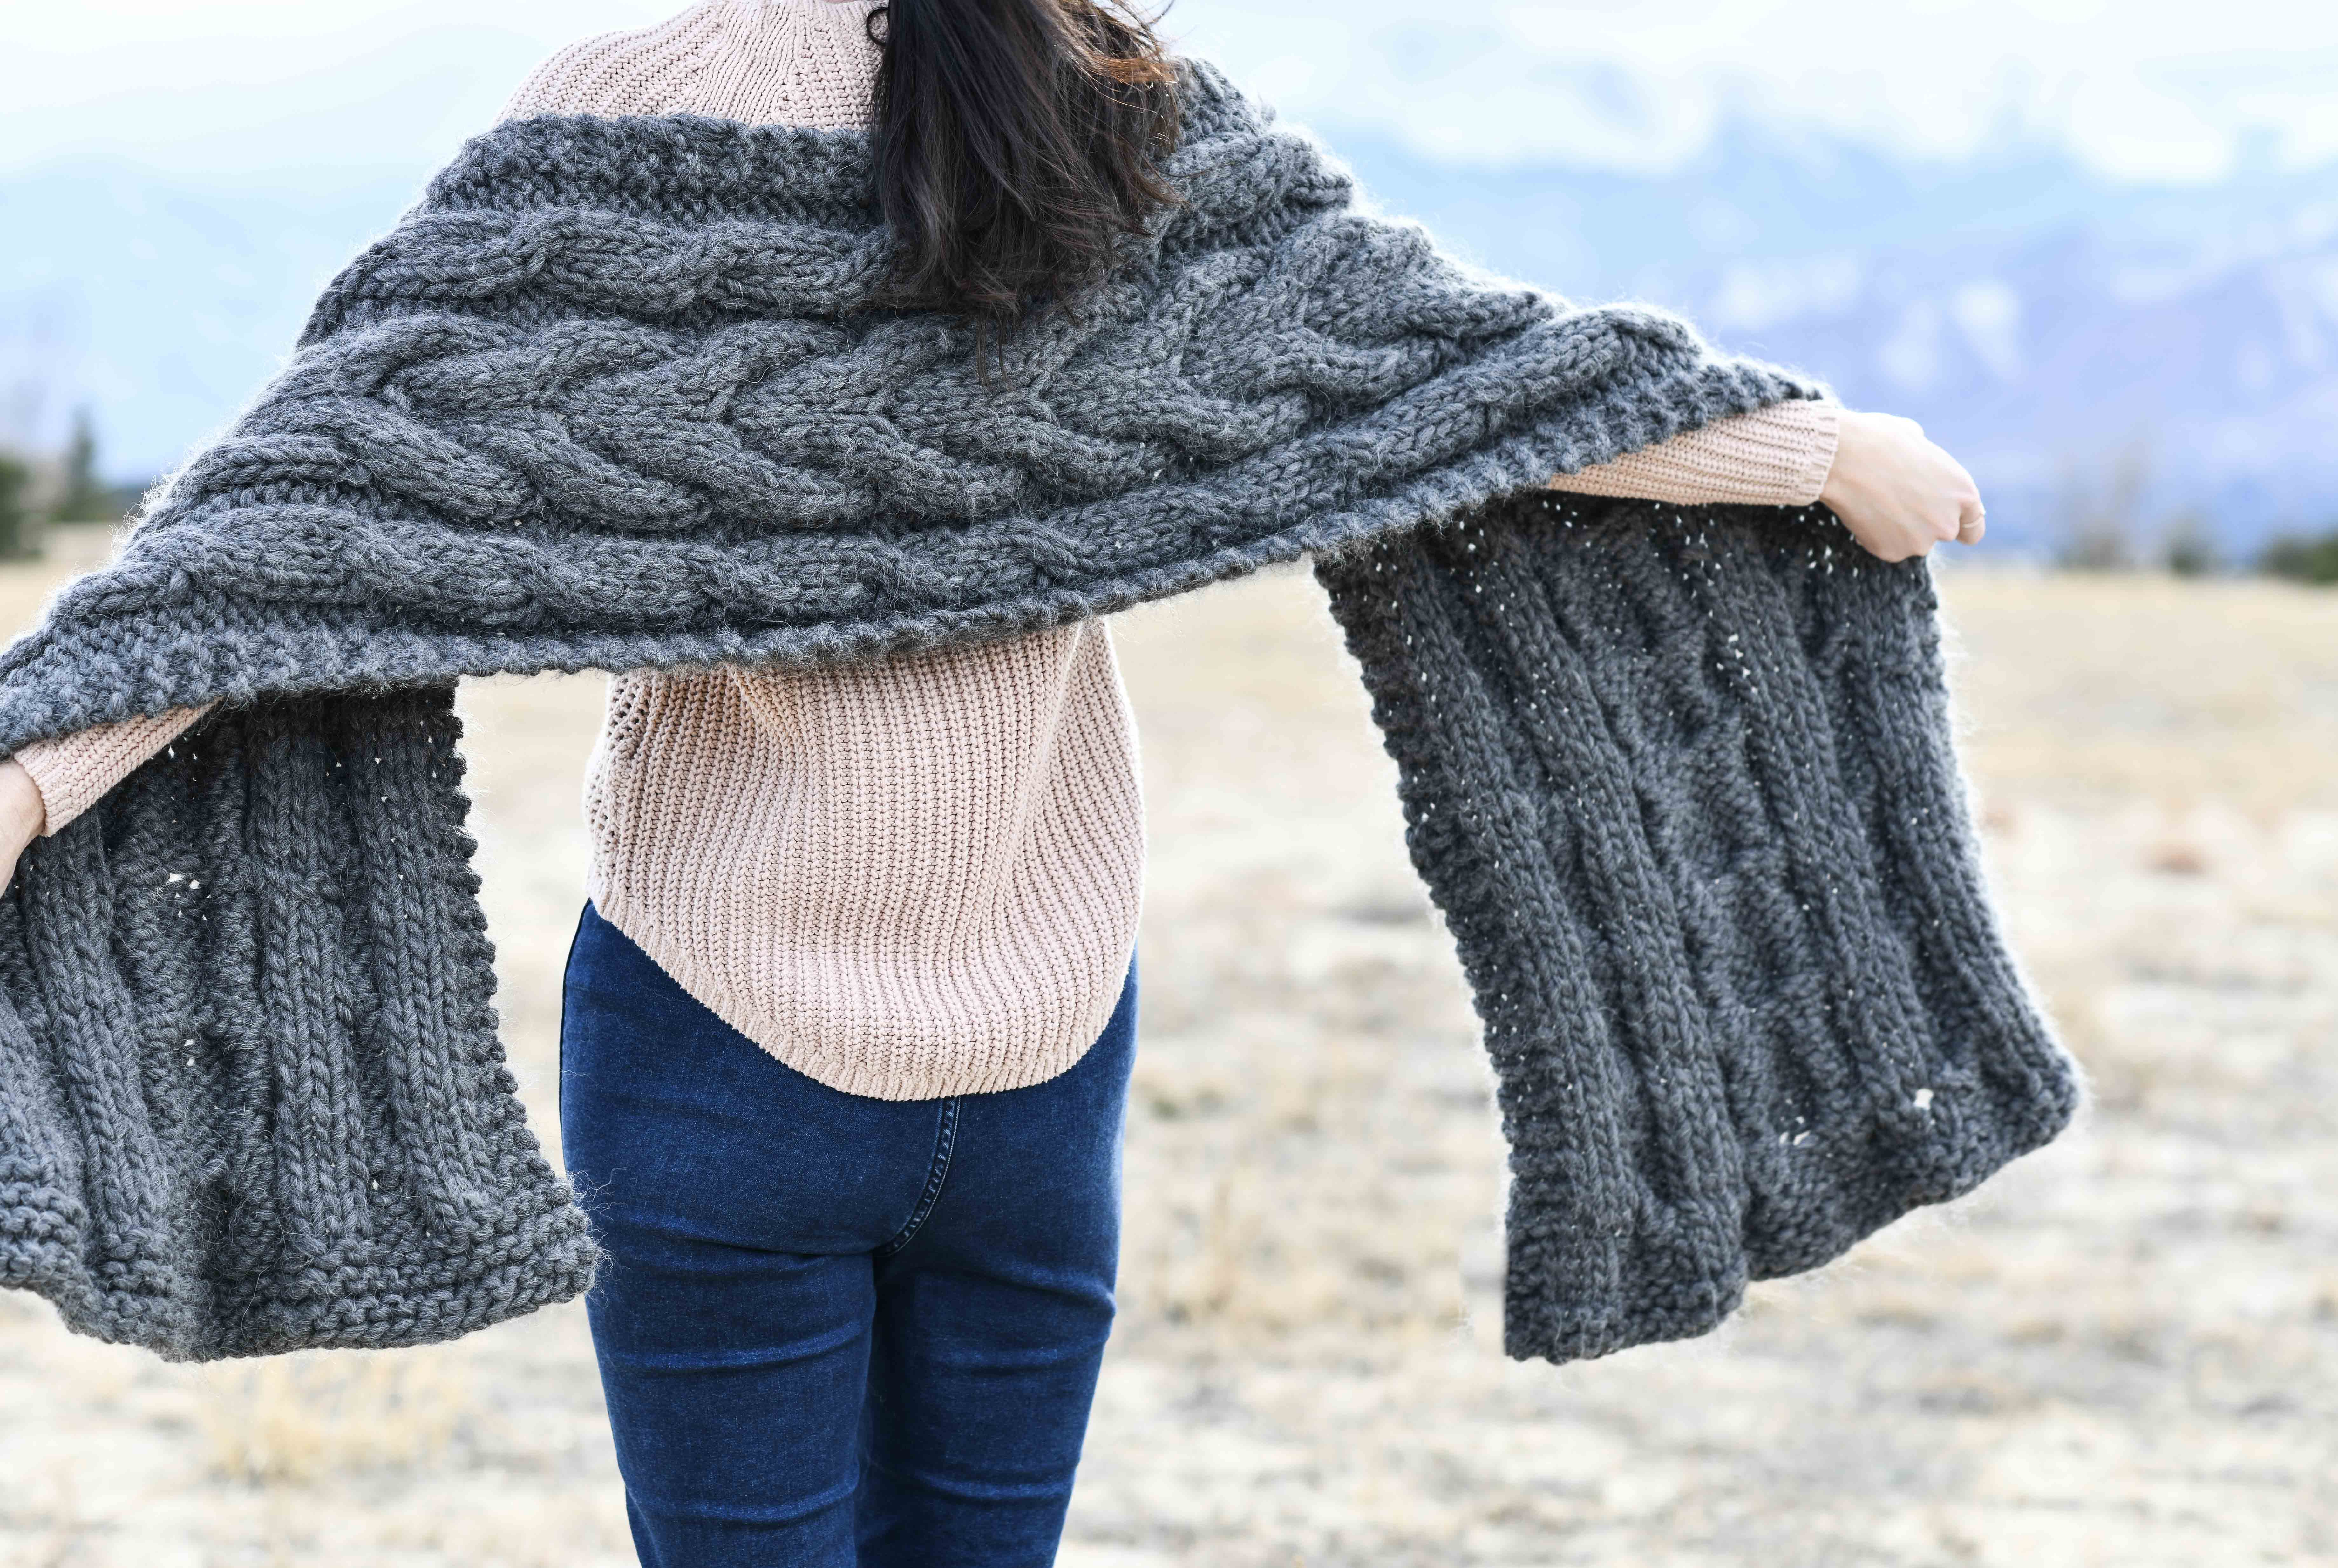 Easy Winding Cables Wrap Knitting Pattern – Mama In A Stitch